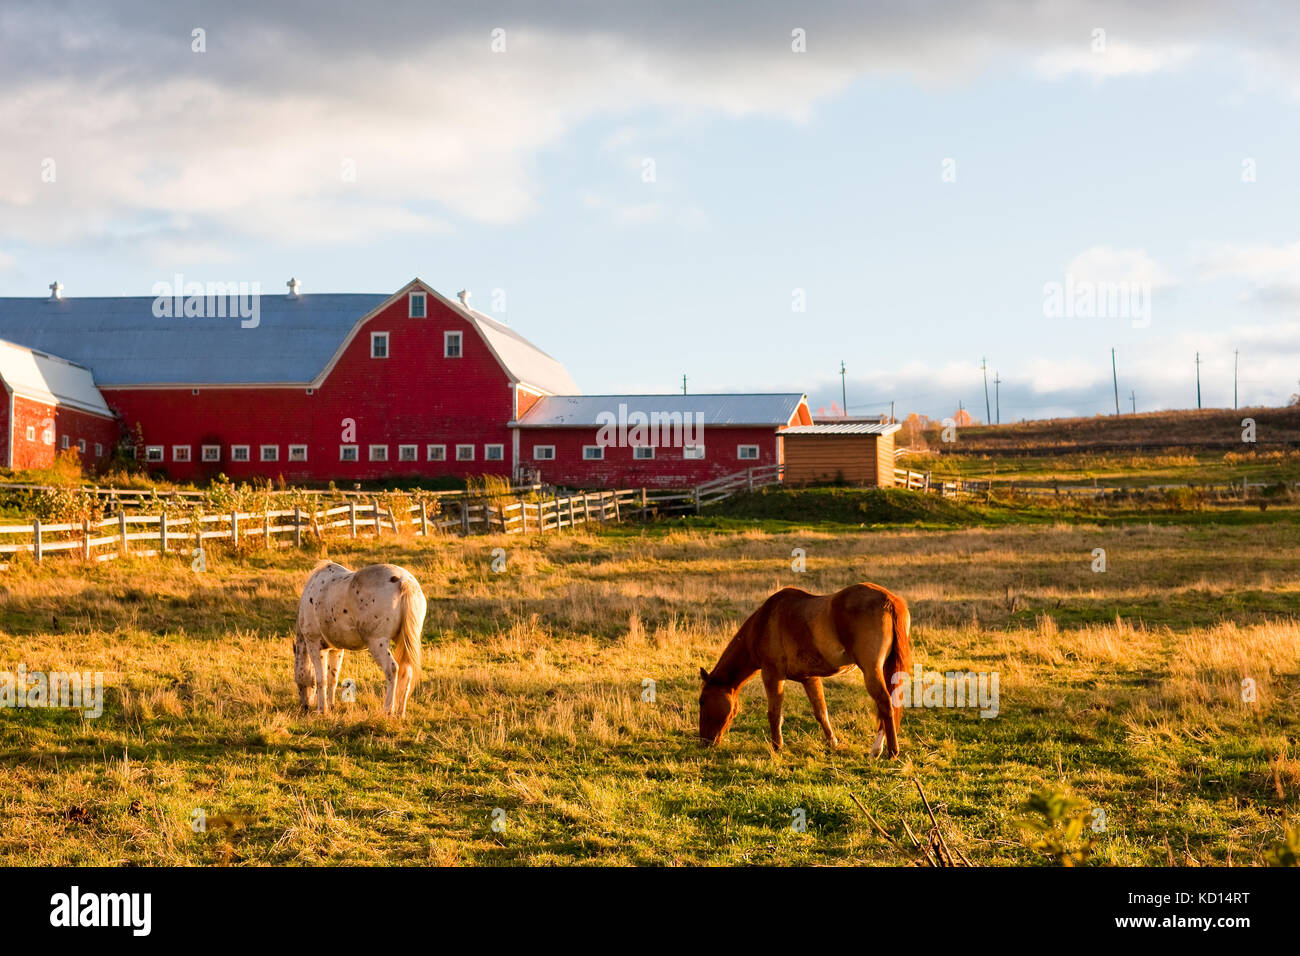 Horses grazing in front of red barn, Fredericton, New Brunswick, Canada Stock Photo